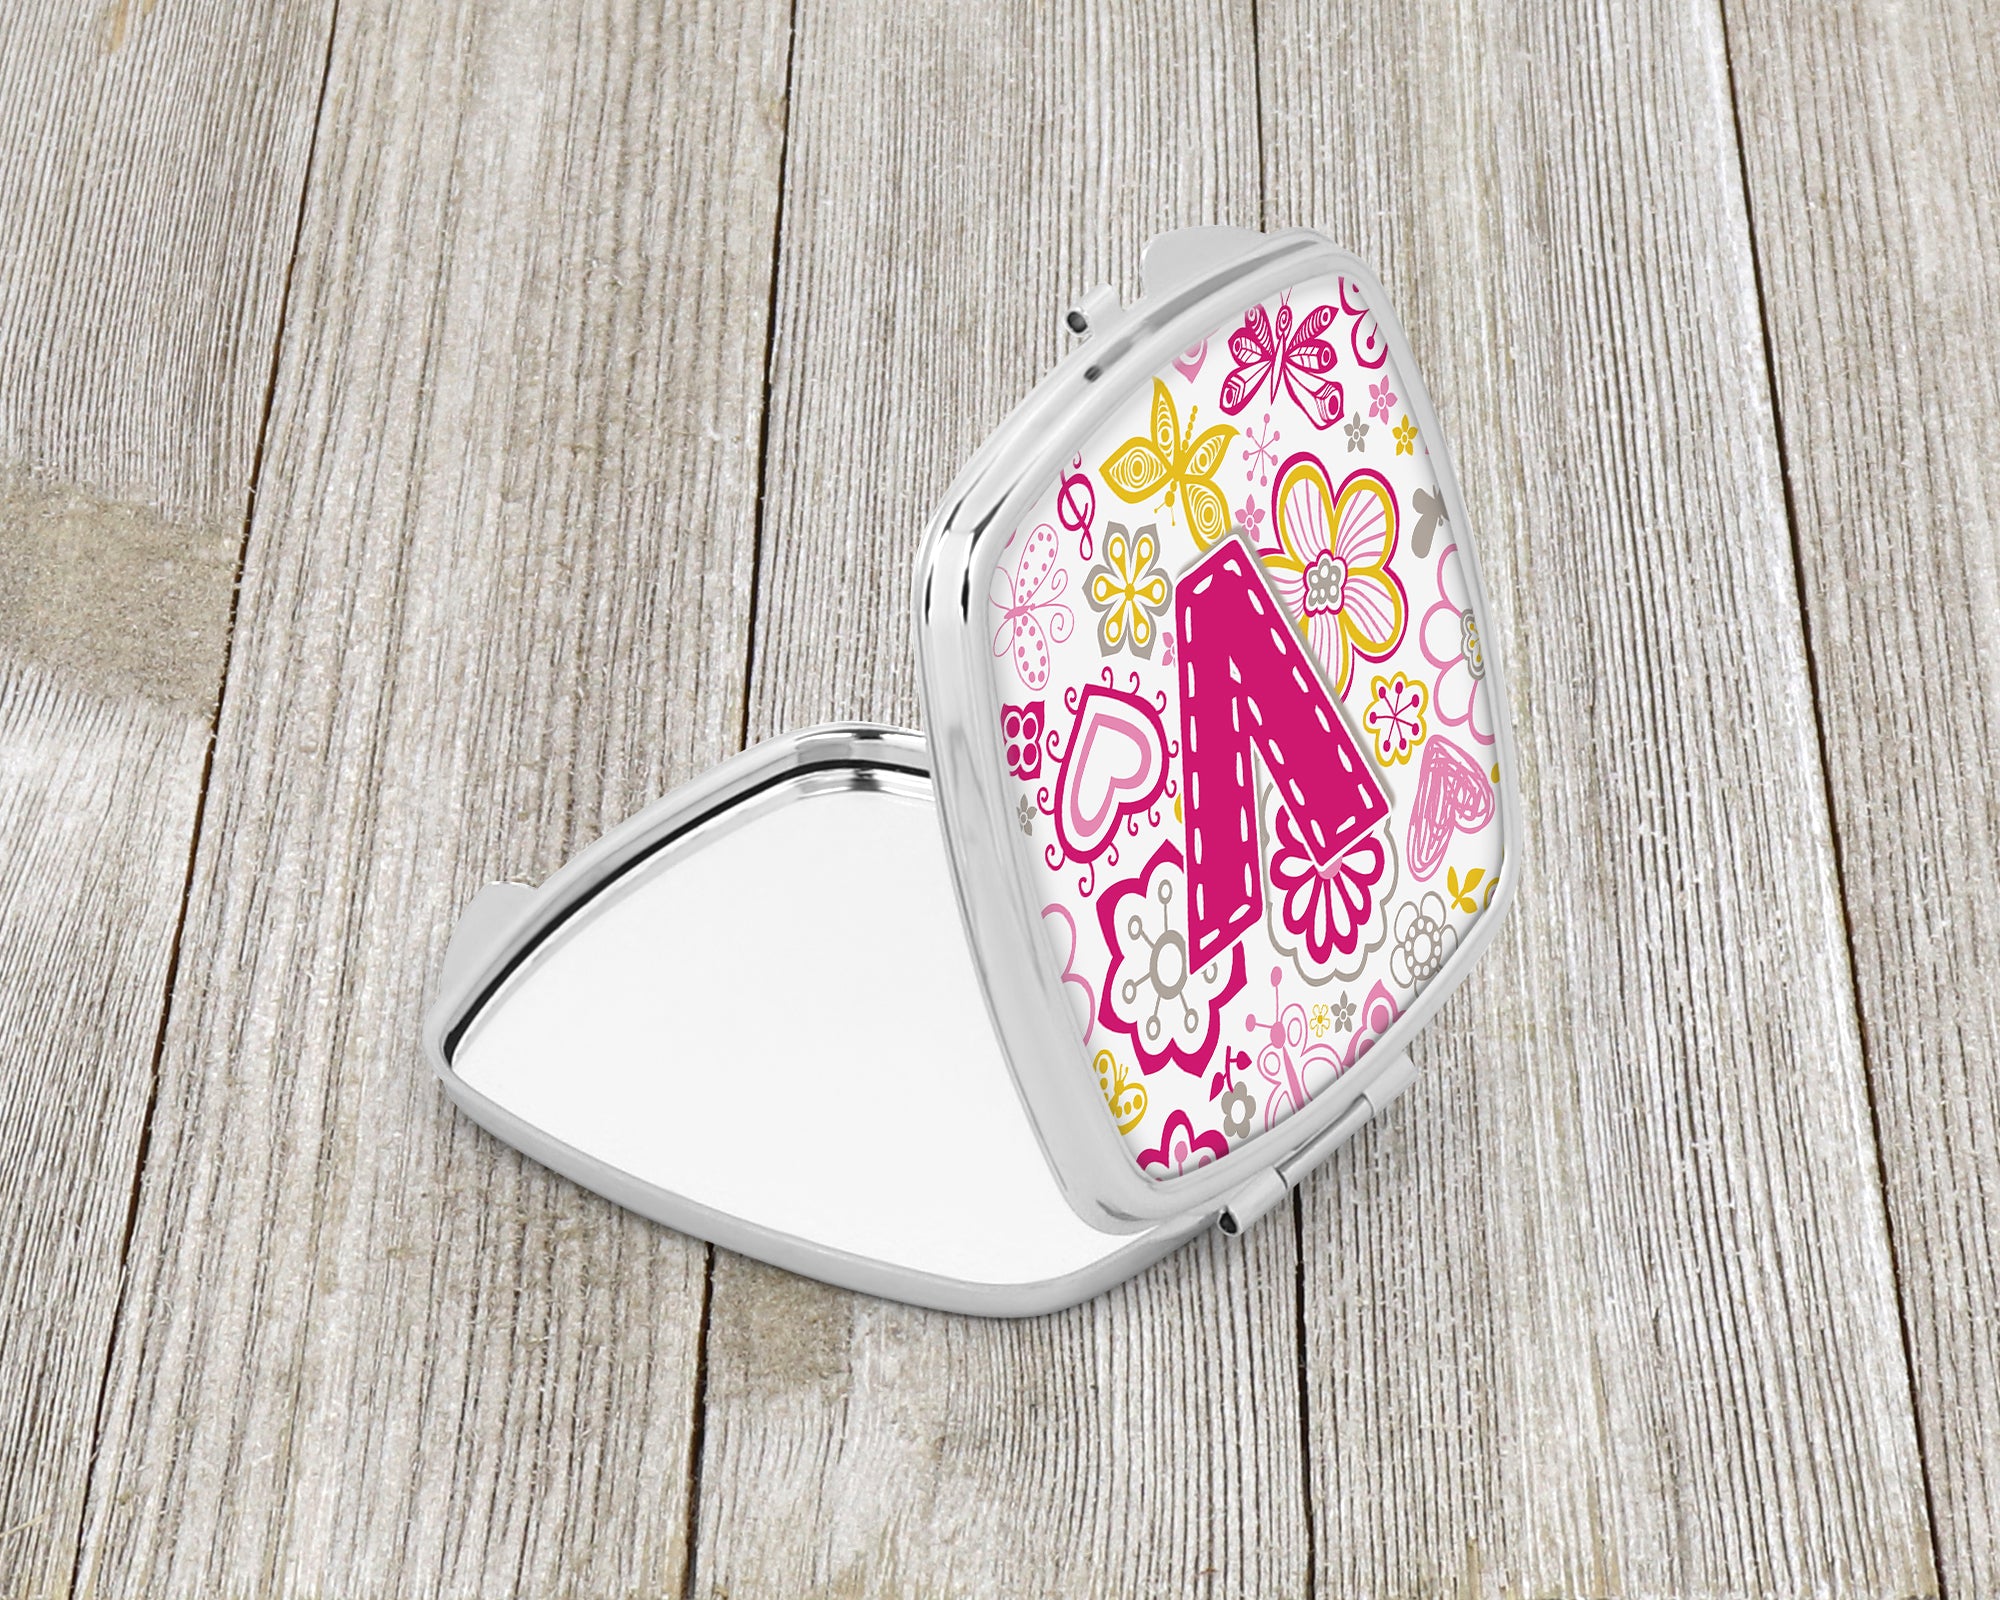 Letter V Flowers and Butterflies Pink Compact Mirror CJ2005-VSCM  the-store.com.